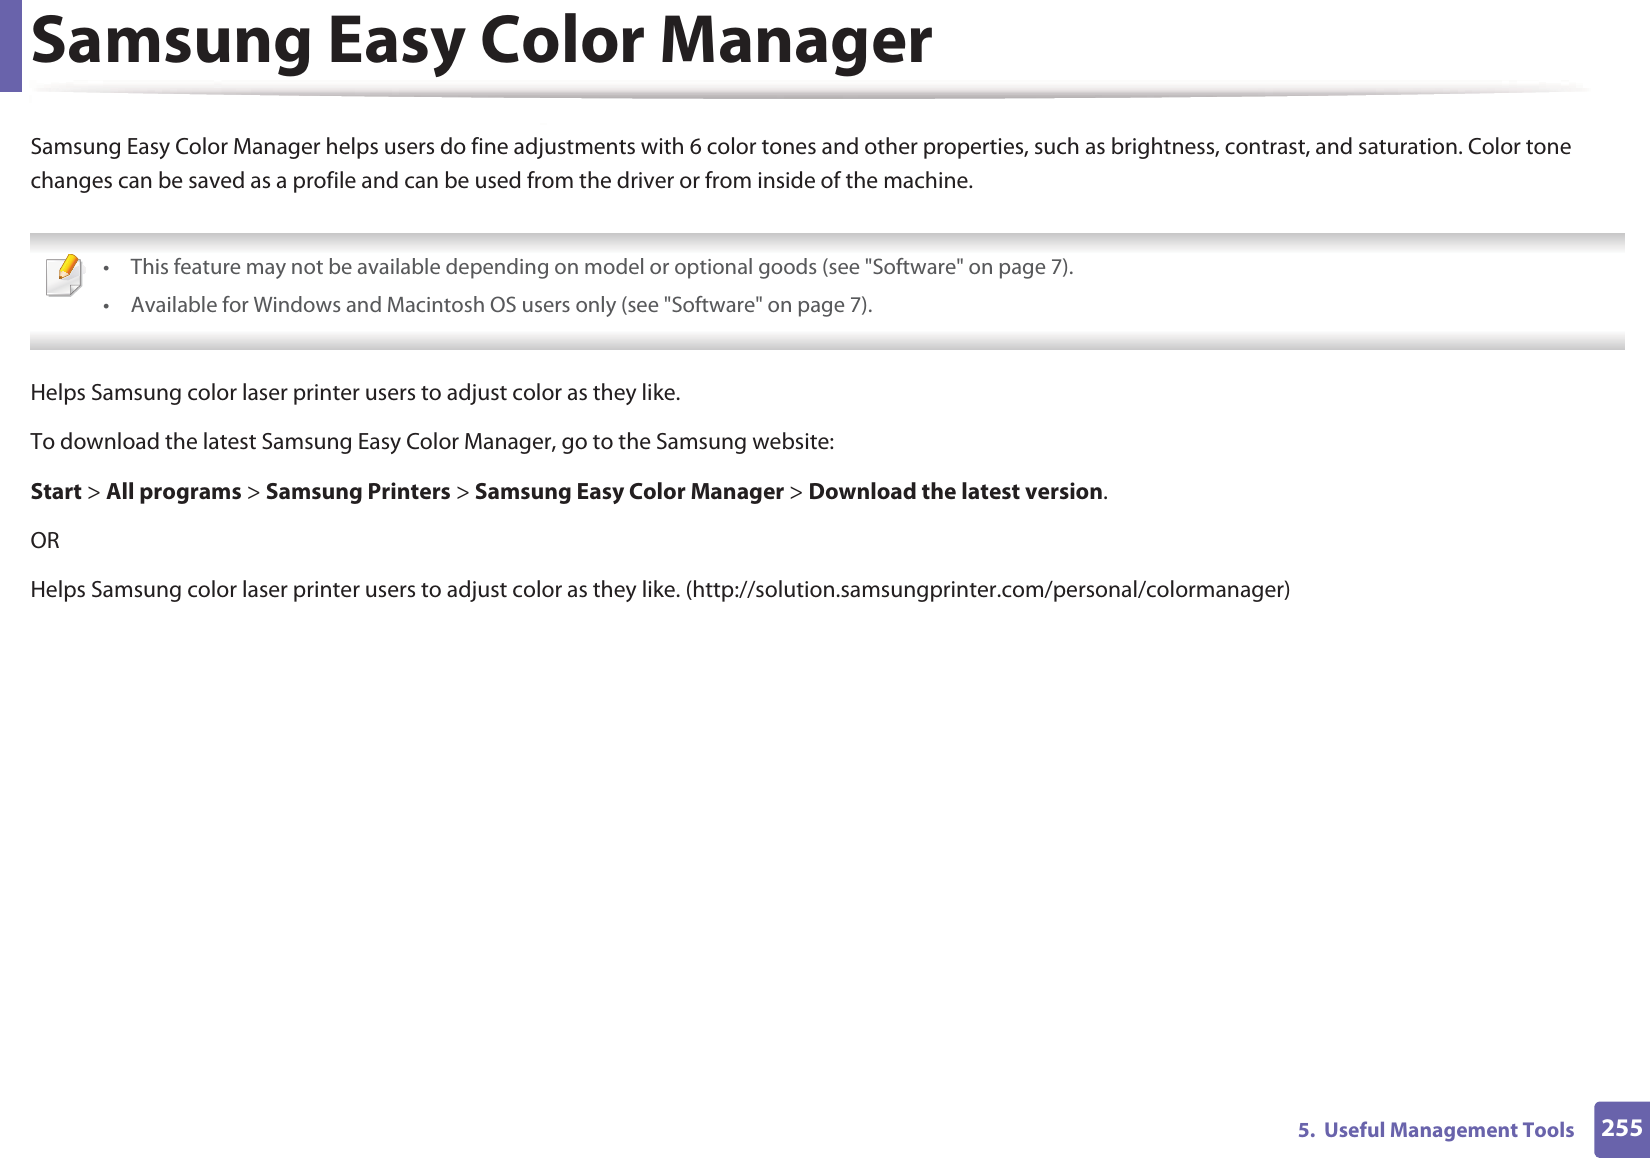 2555.  Useful Management ToolsSamsung Easy Color ManagerSamsung Easy Color Manager helps users do fine adjustments with 6 color tones and other properties, such as brightness, contrast, and saturation. Color tone changes can be saved as a profile and can be used from the driver or from inside of the machine. • This feature may not be available depending on model or optional goods (see &quot;Software&quot; on page 7).• Available for Windows and Macintosh OS users only (see &quot;Software&quot; on page 7). Helps Samsung color laser printer users to adjust color as they like.To download the latest Samsung Easy Color Manager, go to the Samsung website: Start &gt; All programs &gt; Samsung Printers &gt; Samsung Easy Color Manager &gt; Download the latest version.ORHelps Samsung color laser printer users to adjust color as they like. (http://solution.samsungprinter.com/personal/colormanager)